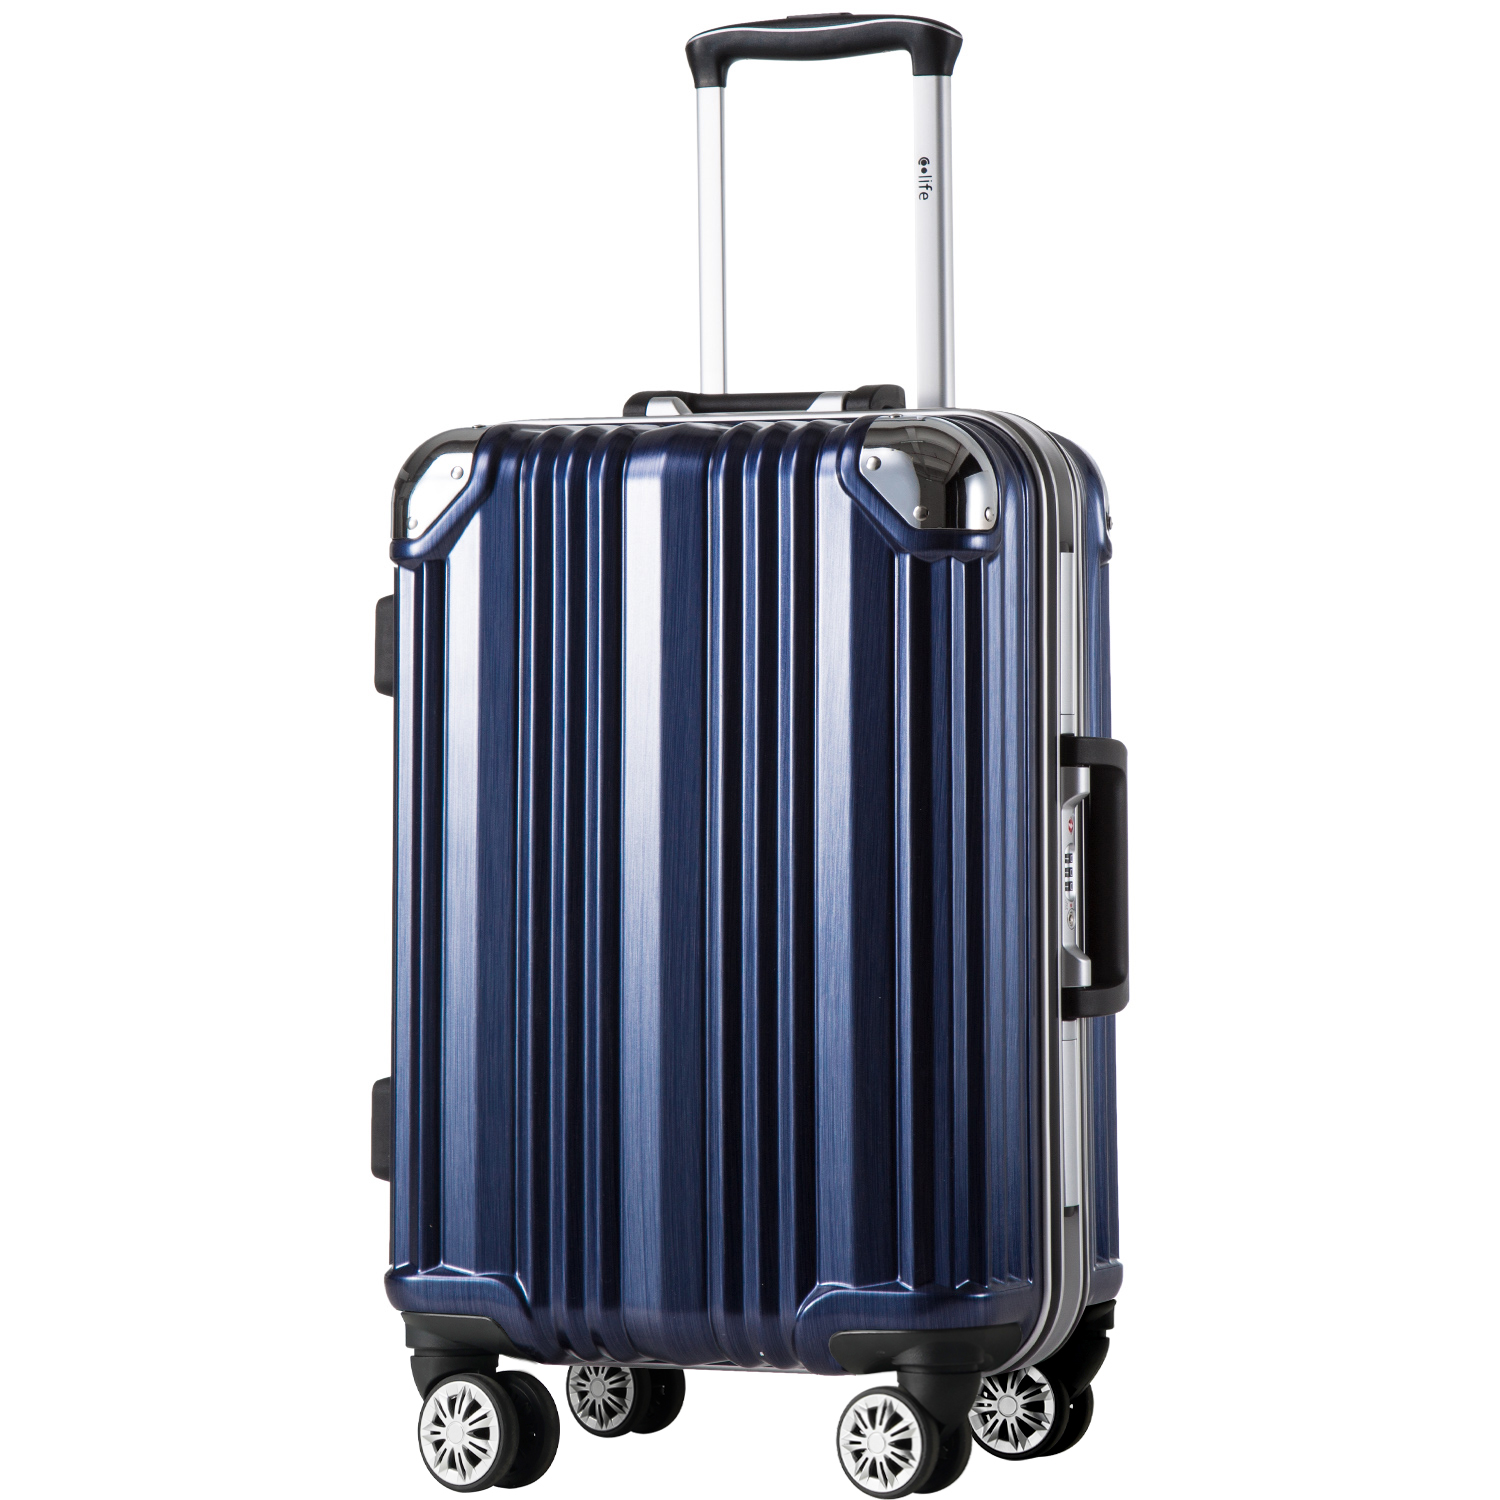 Coolife Luggage Aluminium Frame Suitcase TSA Lock 100% PC 20in 24in 28in YD63S/M/L